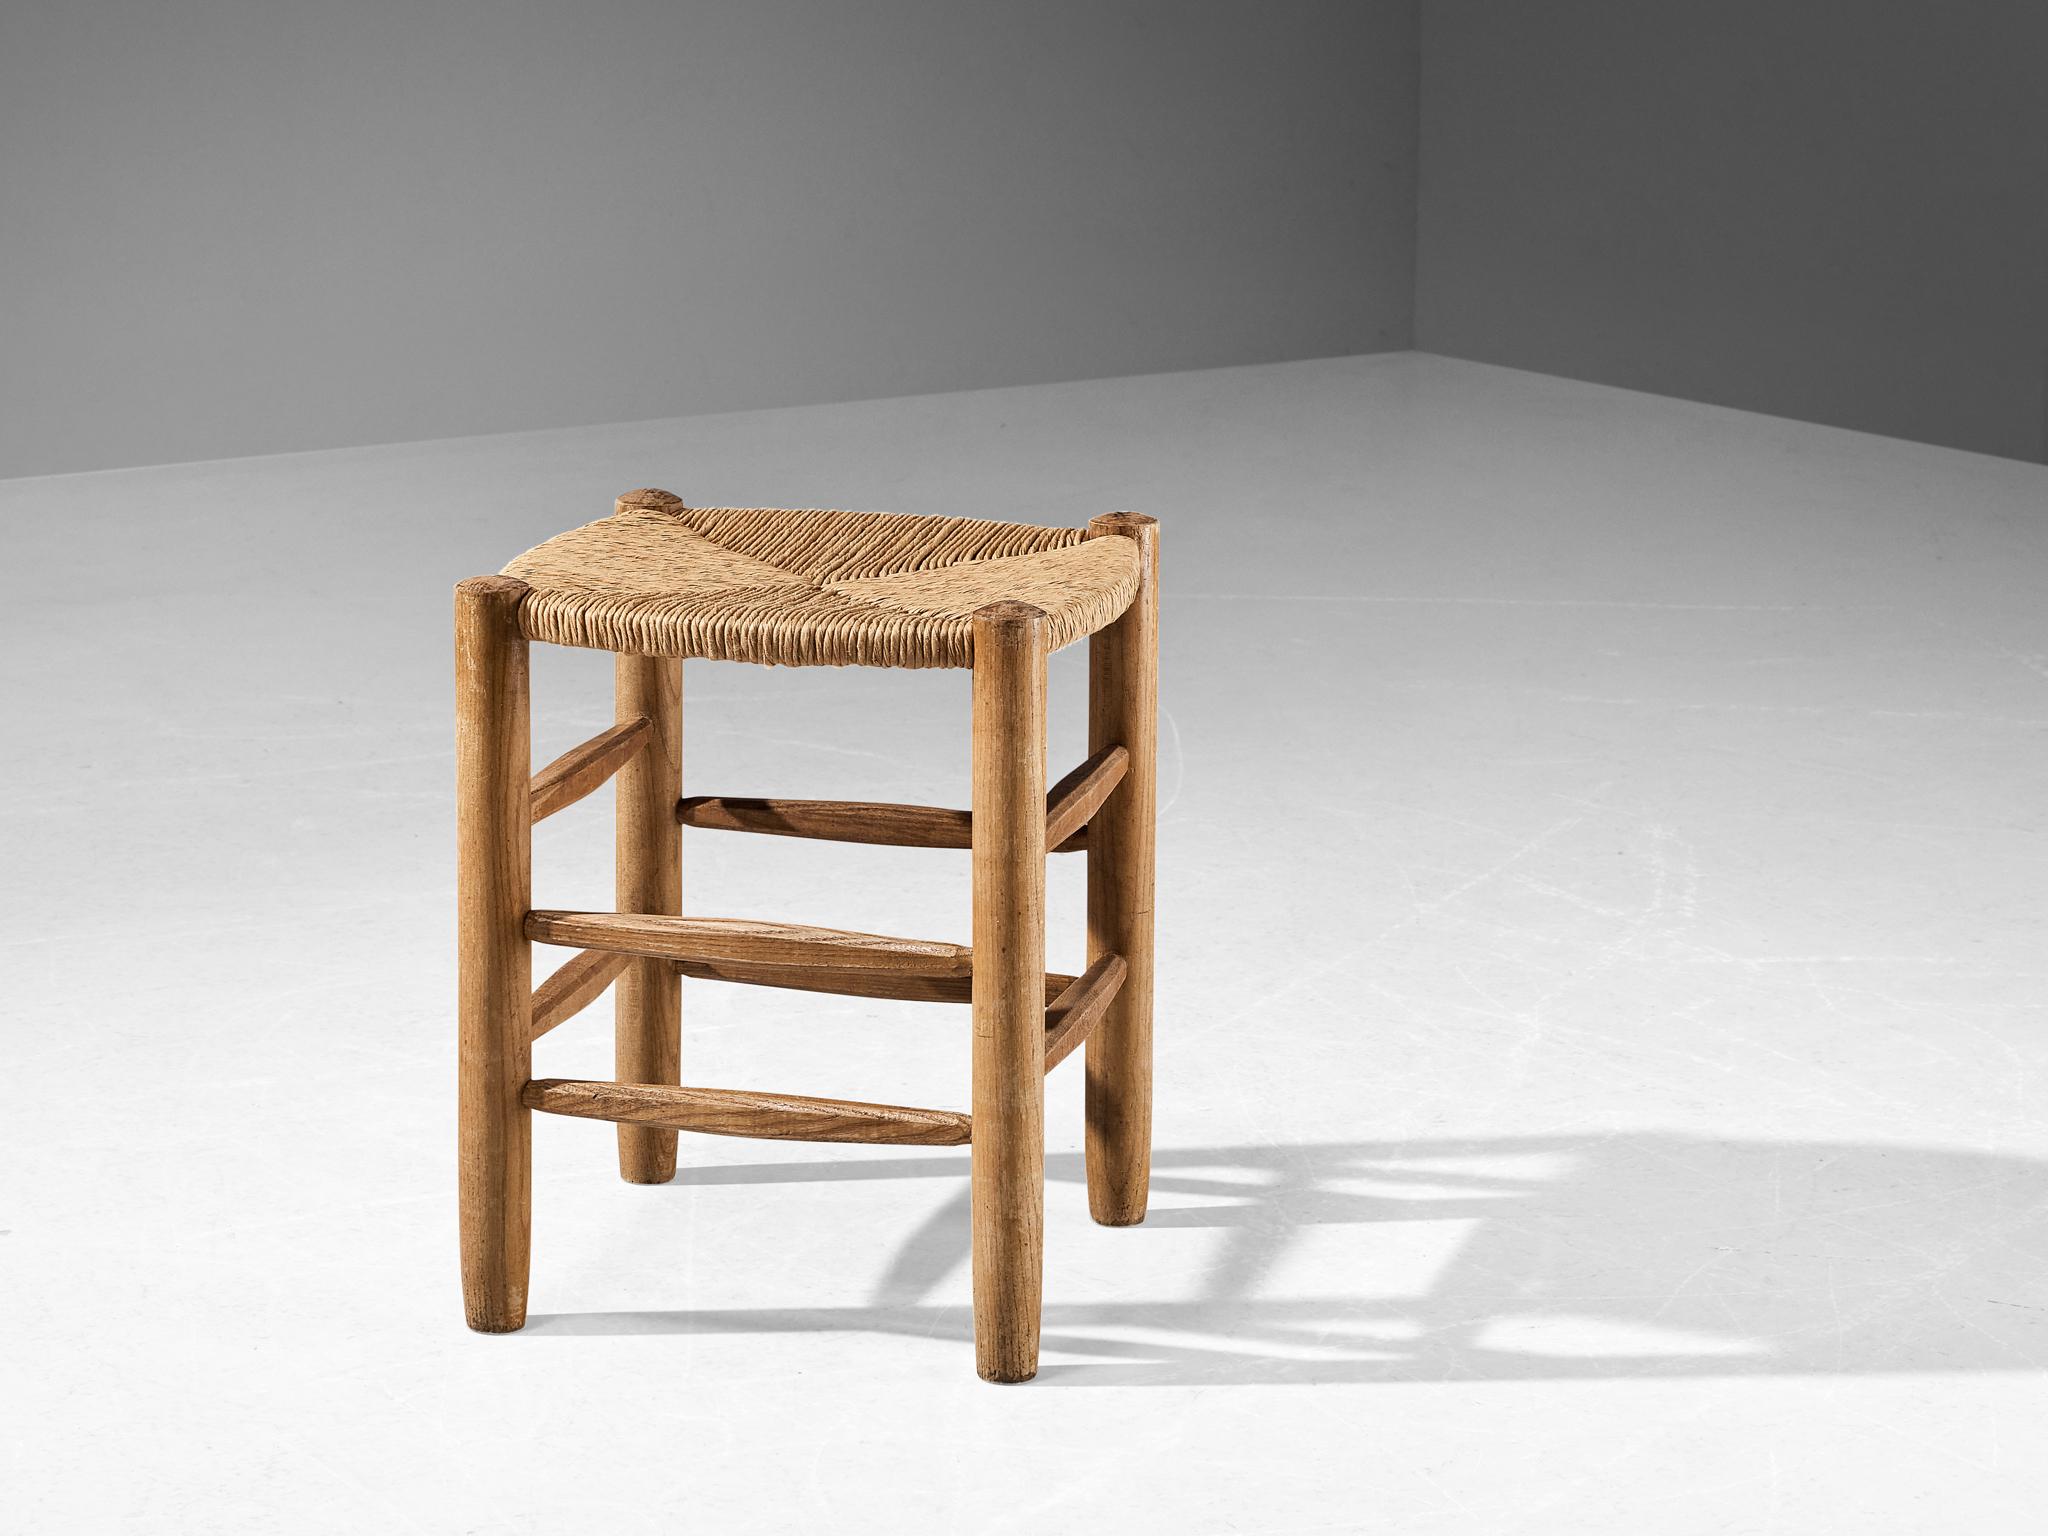 Charlotte Perriand, model '19' stool, oak, rope, France, 1950s

A beautiful design by Charlotte Perriand: this '19' stool, a piece from the 1950s that embodies natural beauty and impeccable design. Crafted with precision, the stool features a sturdy